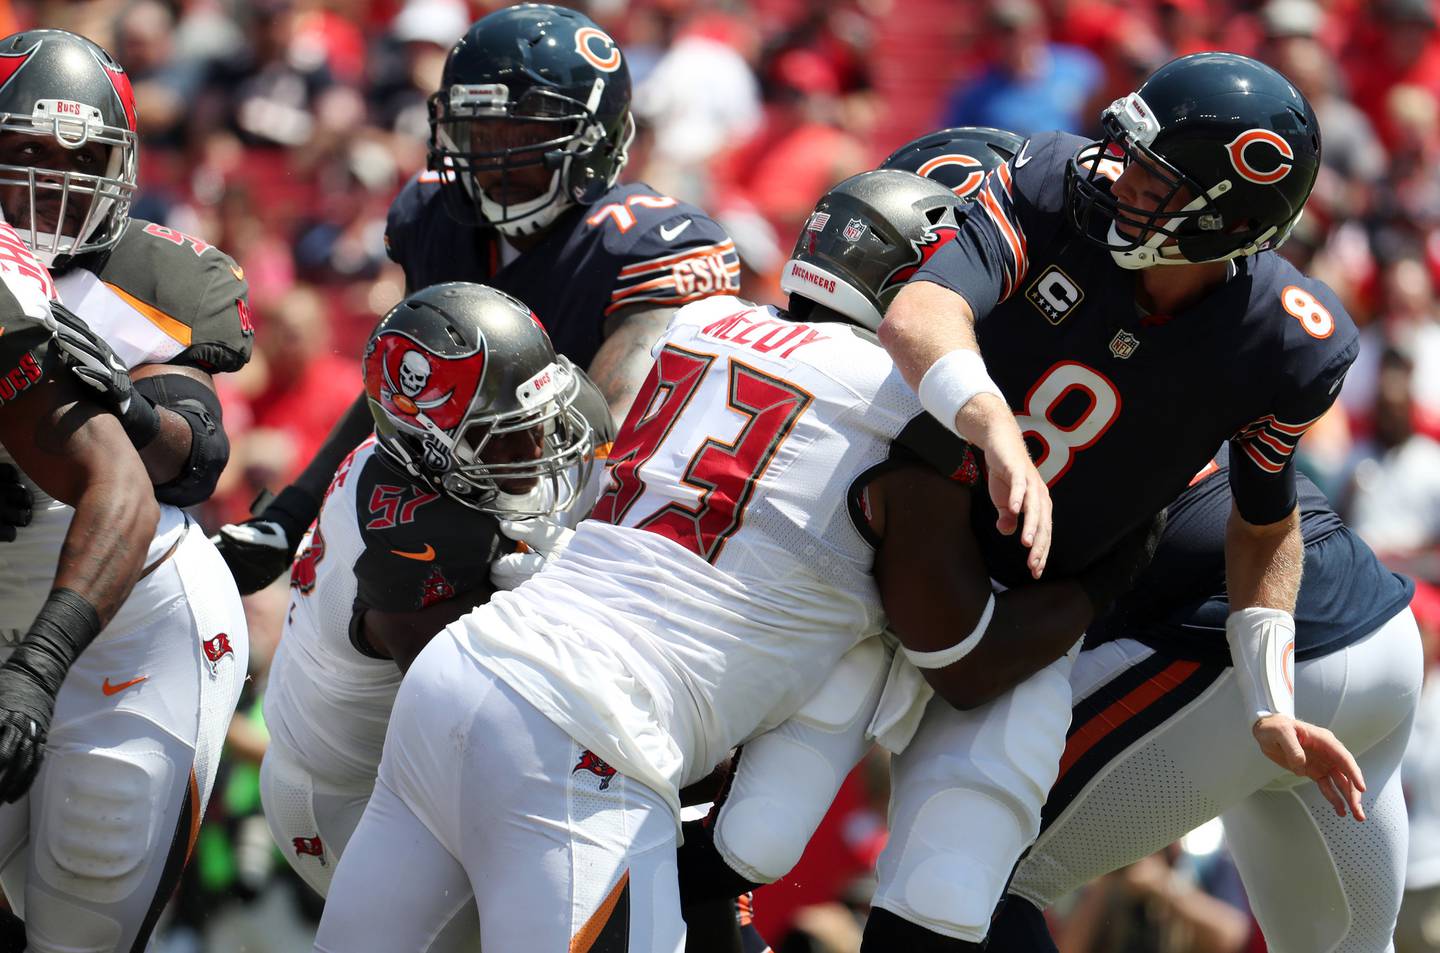 Bears quarterback Mike Glennon passes under pressure from Buccaneers defensive tackle Gerald McCoy in the first quarter on Sept. 17, 2017, at Raymond James Stadium in Tampa, Fla.